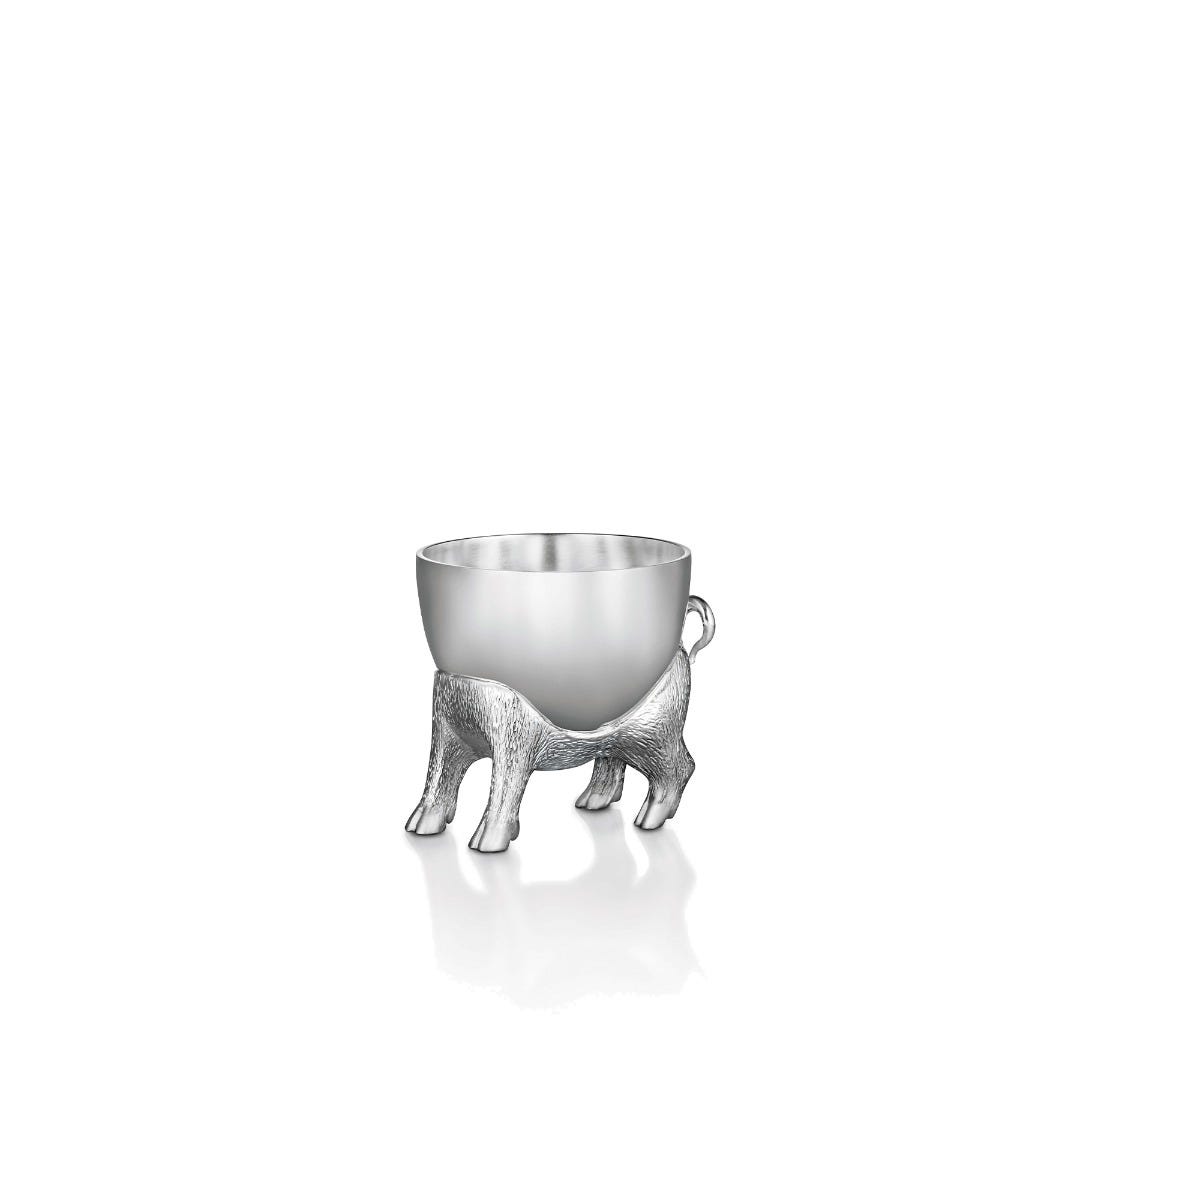 Piglet Egg Cup in Sterling Silver